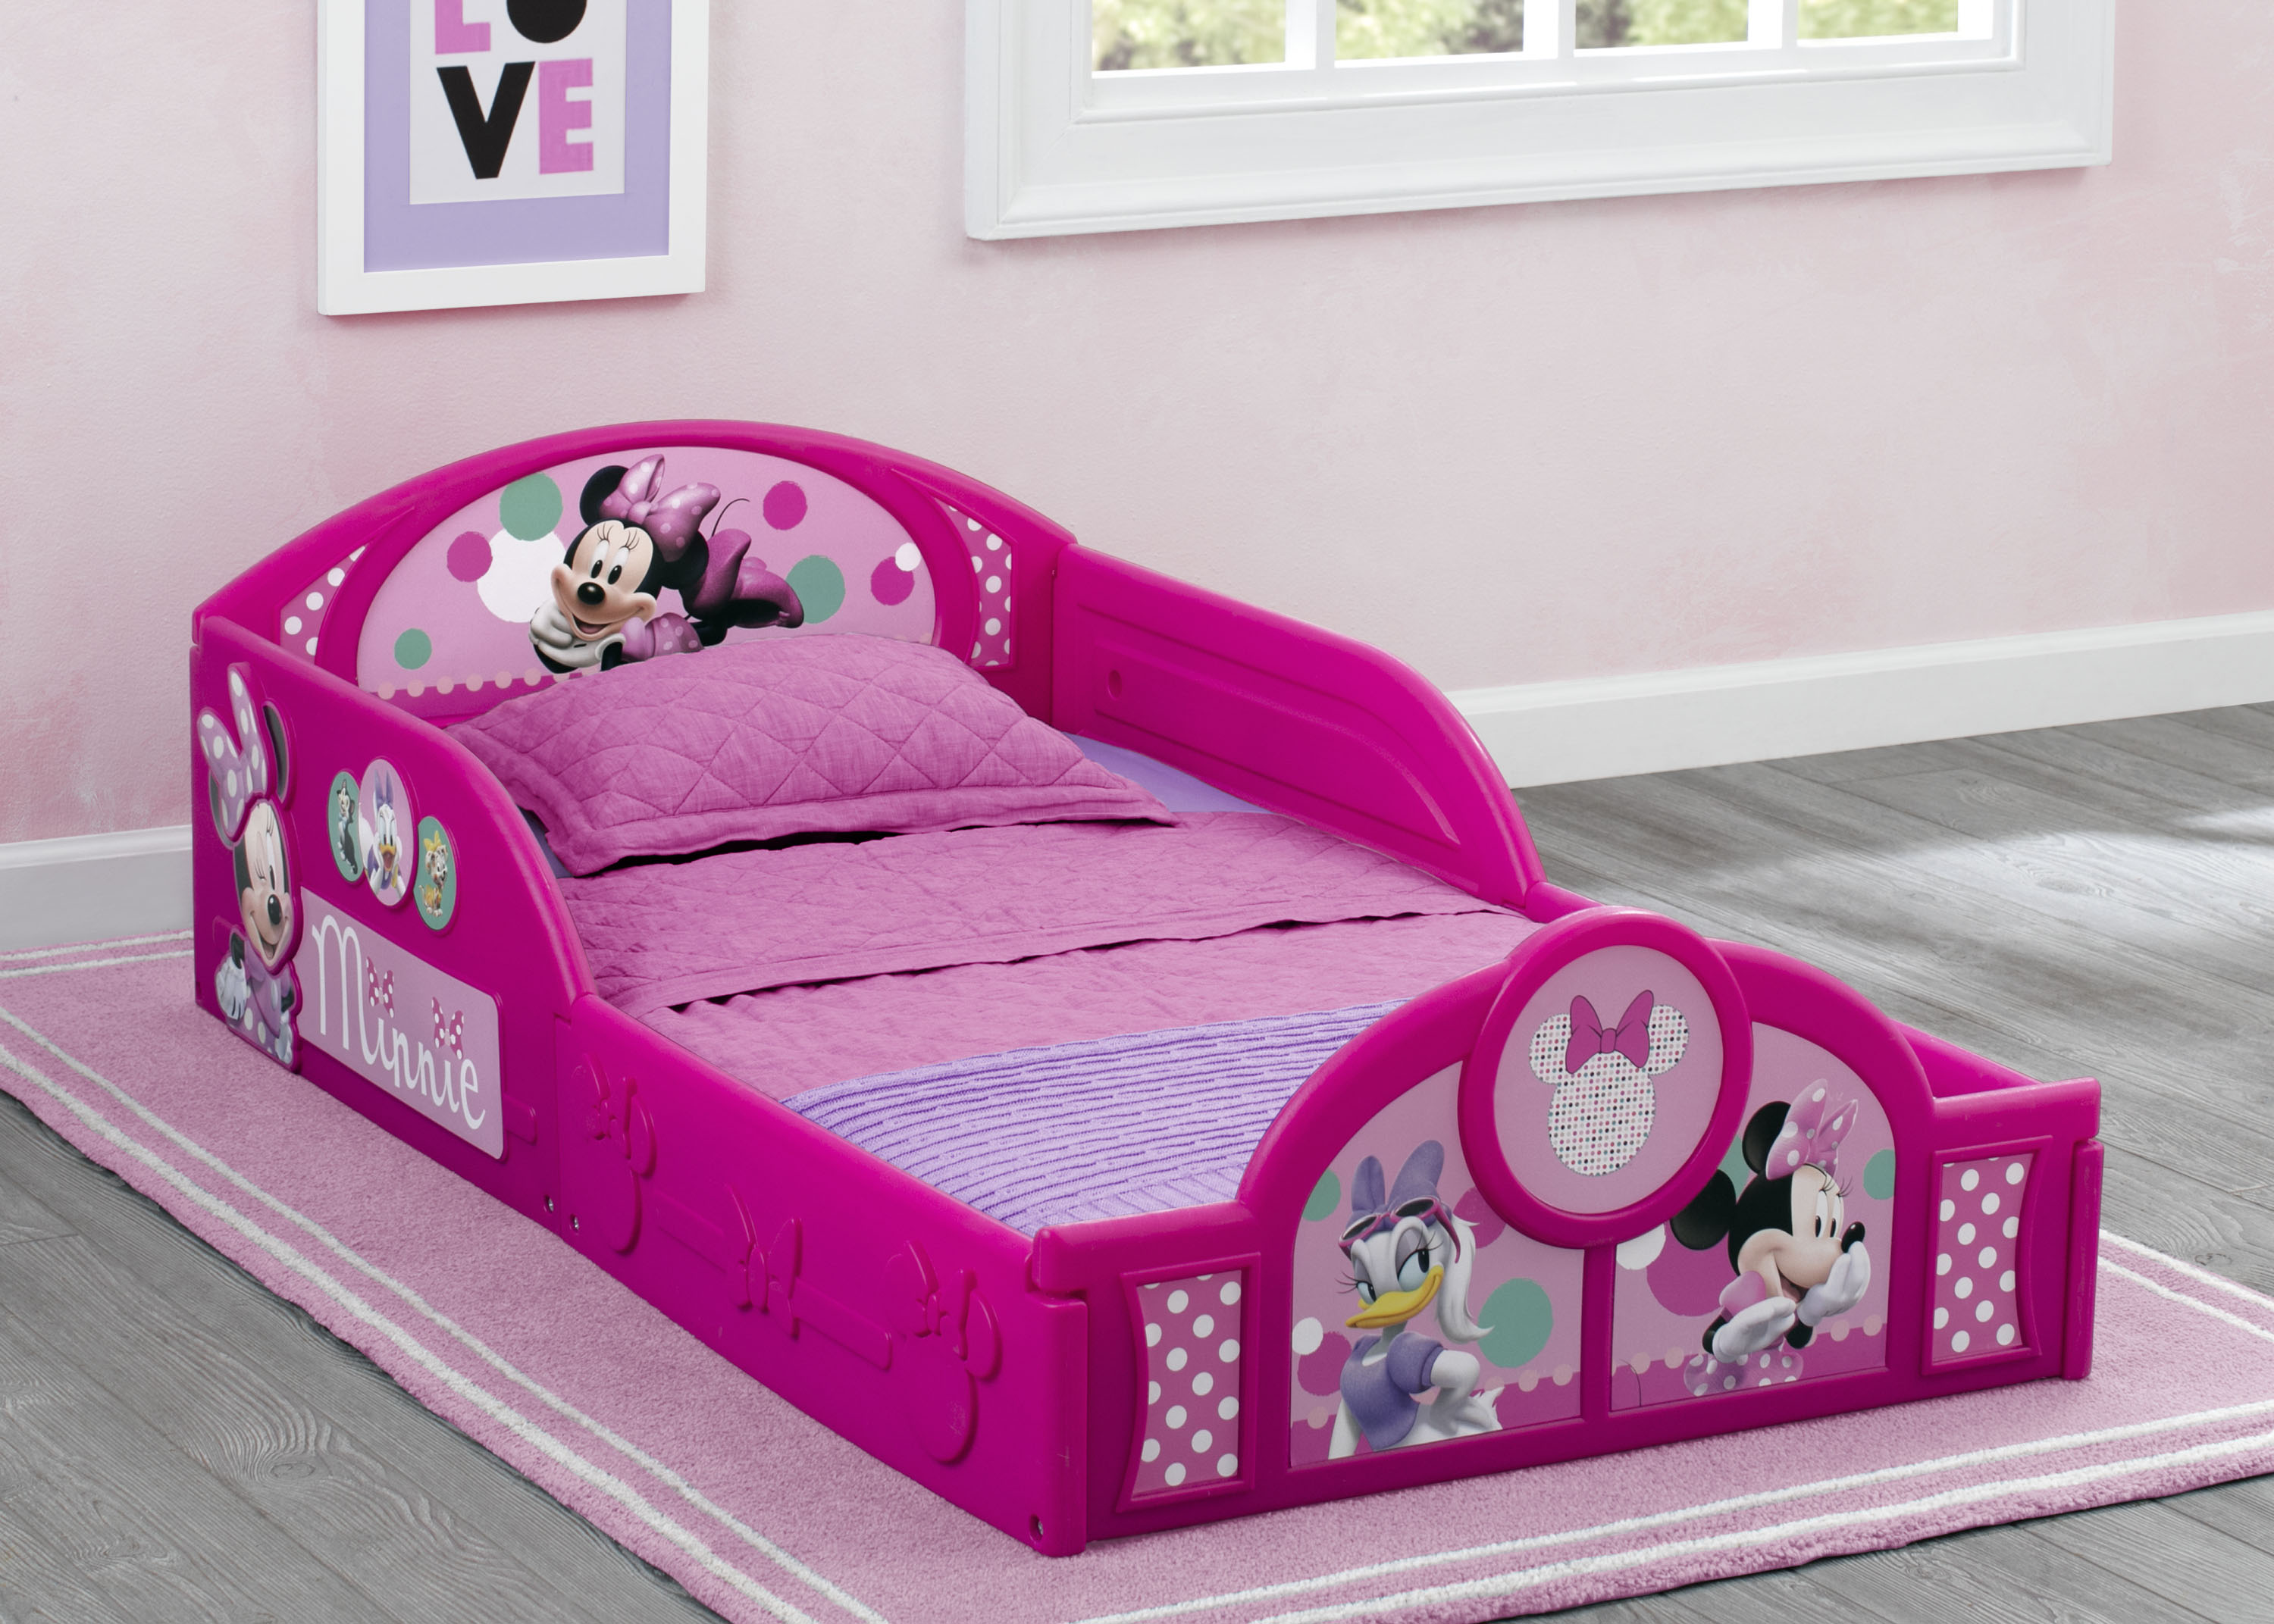 Disney Minnie Mouse Plastic Sleep and Play Toddler Bed by Delta Children - image 4 of 9